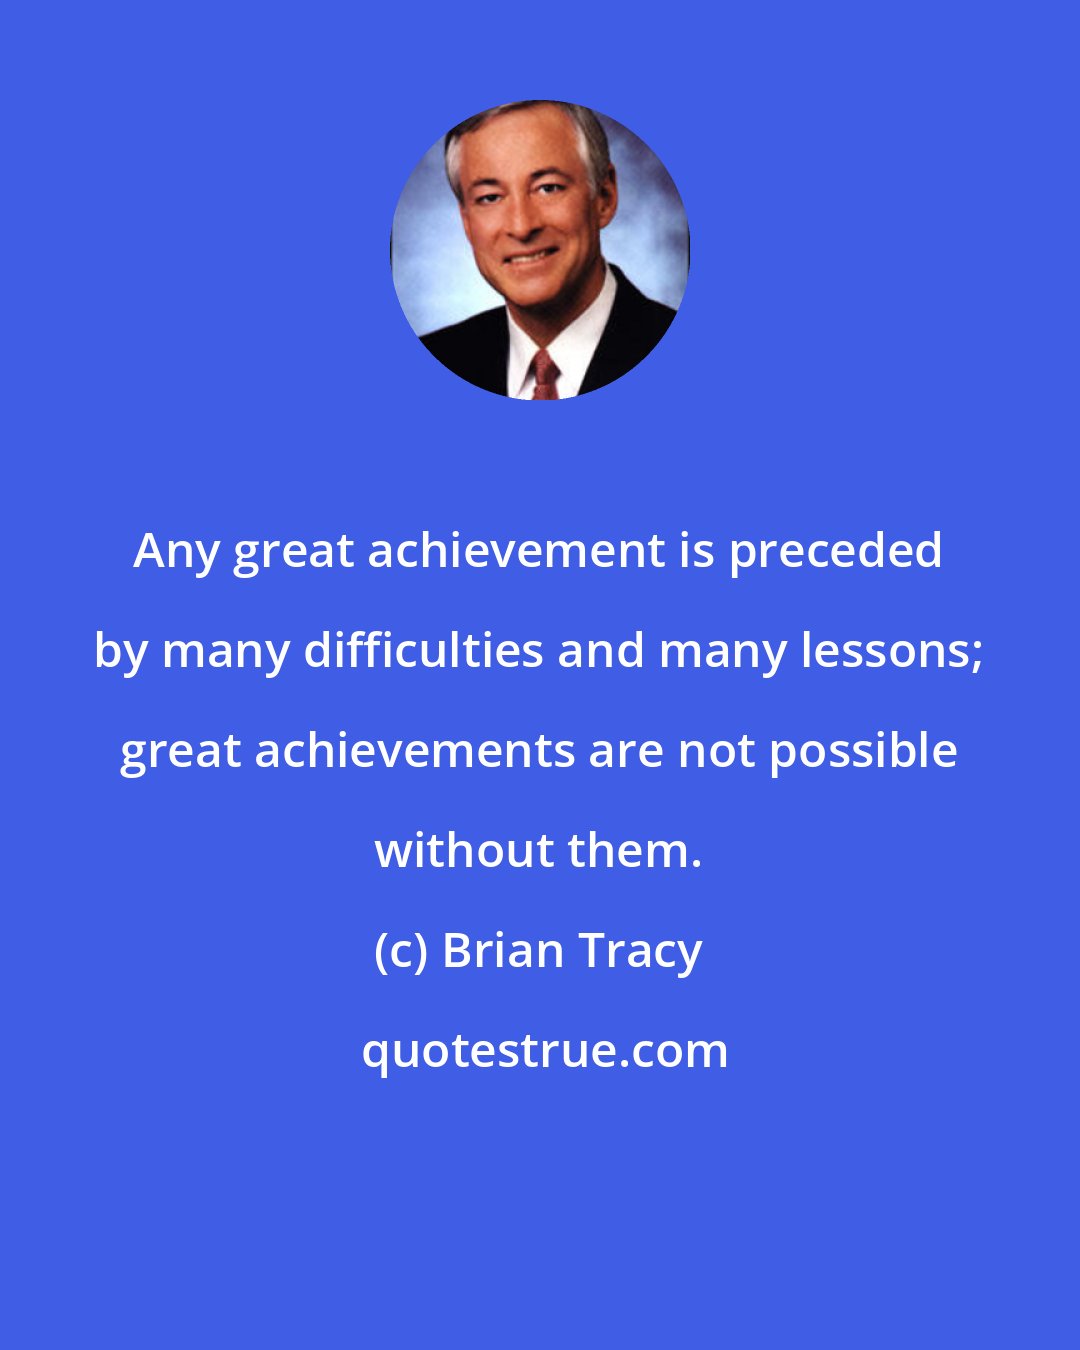 Brian Tracy: Any great achievement is preceded by many difficulties and many lessons; great achievements are not possible without them.